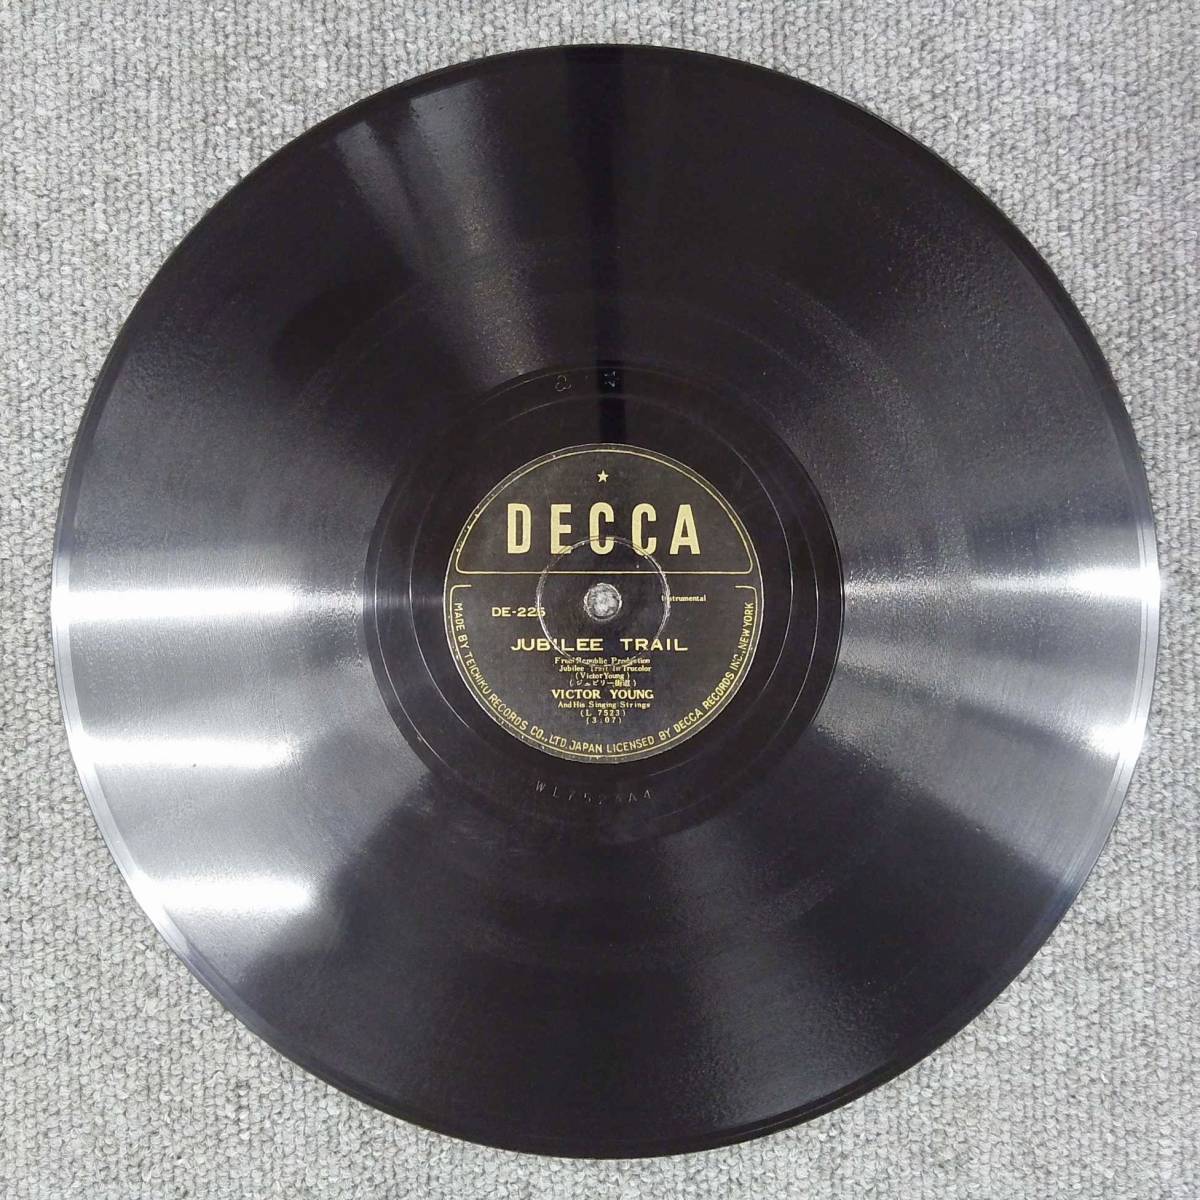 P盤 レコード VICTOR YOUNG / RUBY / JUBILEE TRAIL DE-225 DECCA ny29_画像4